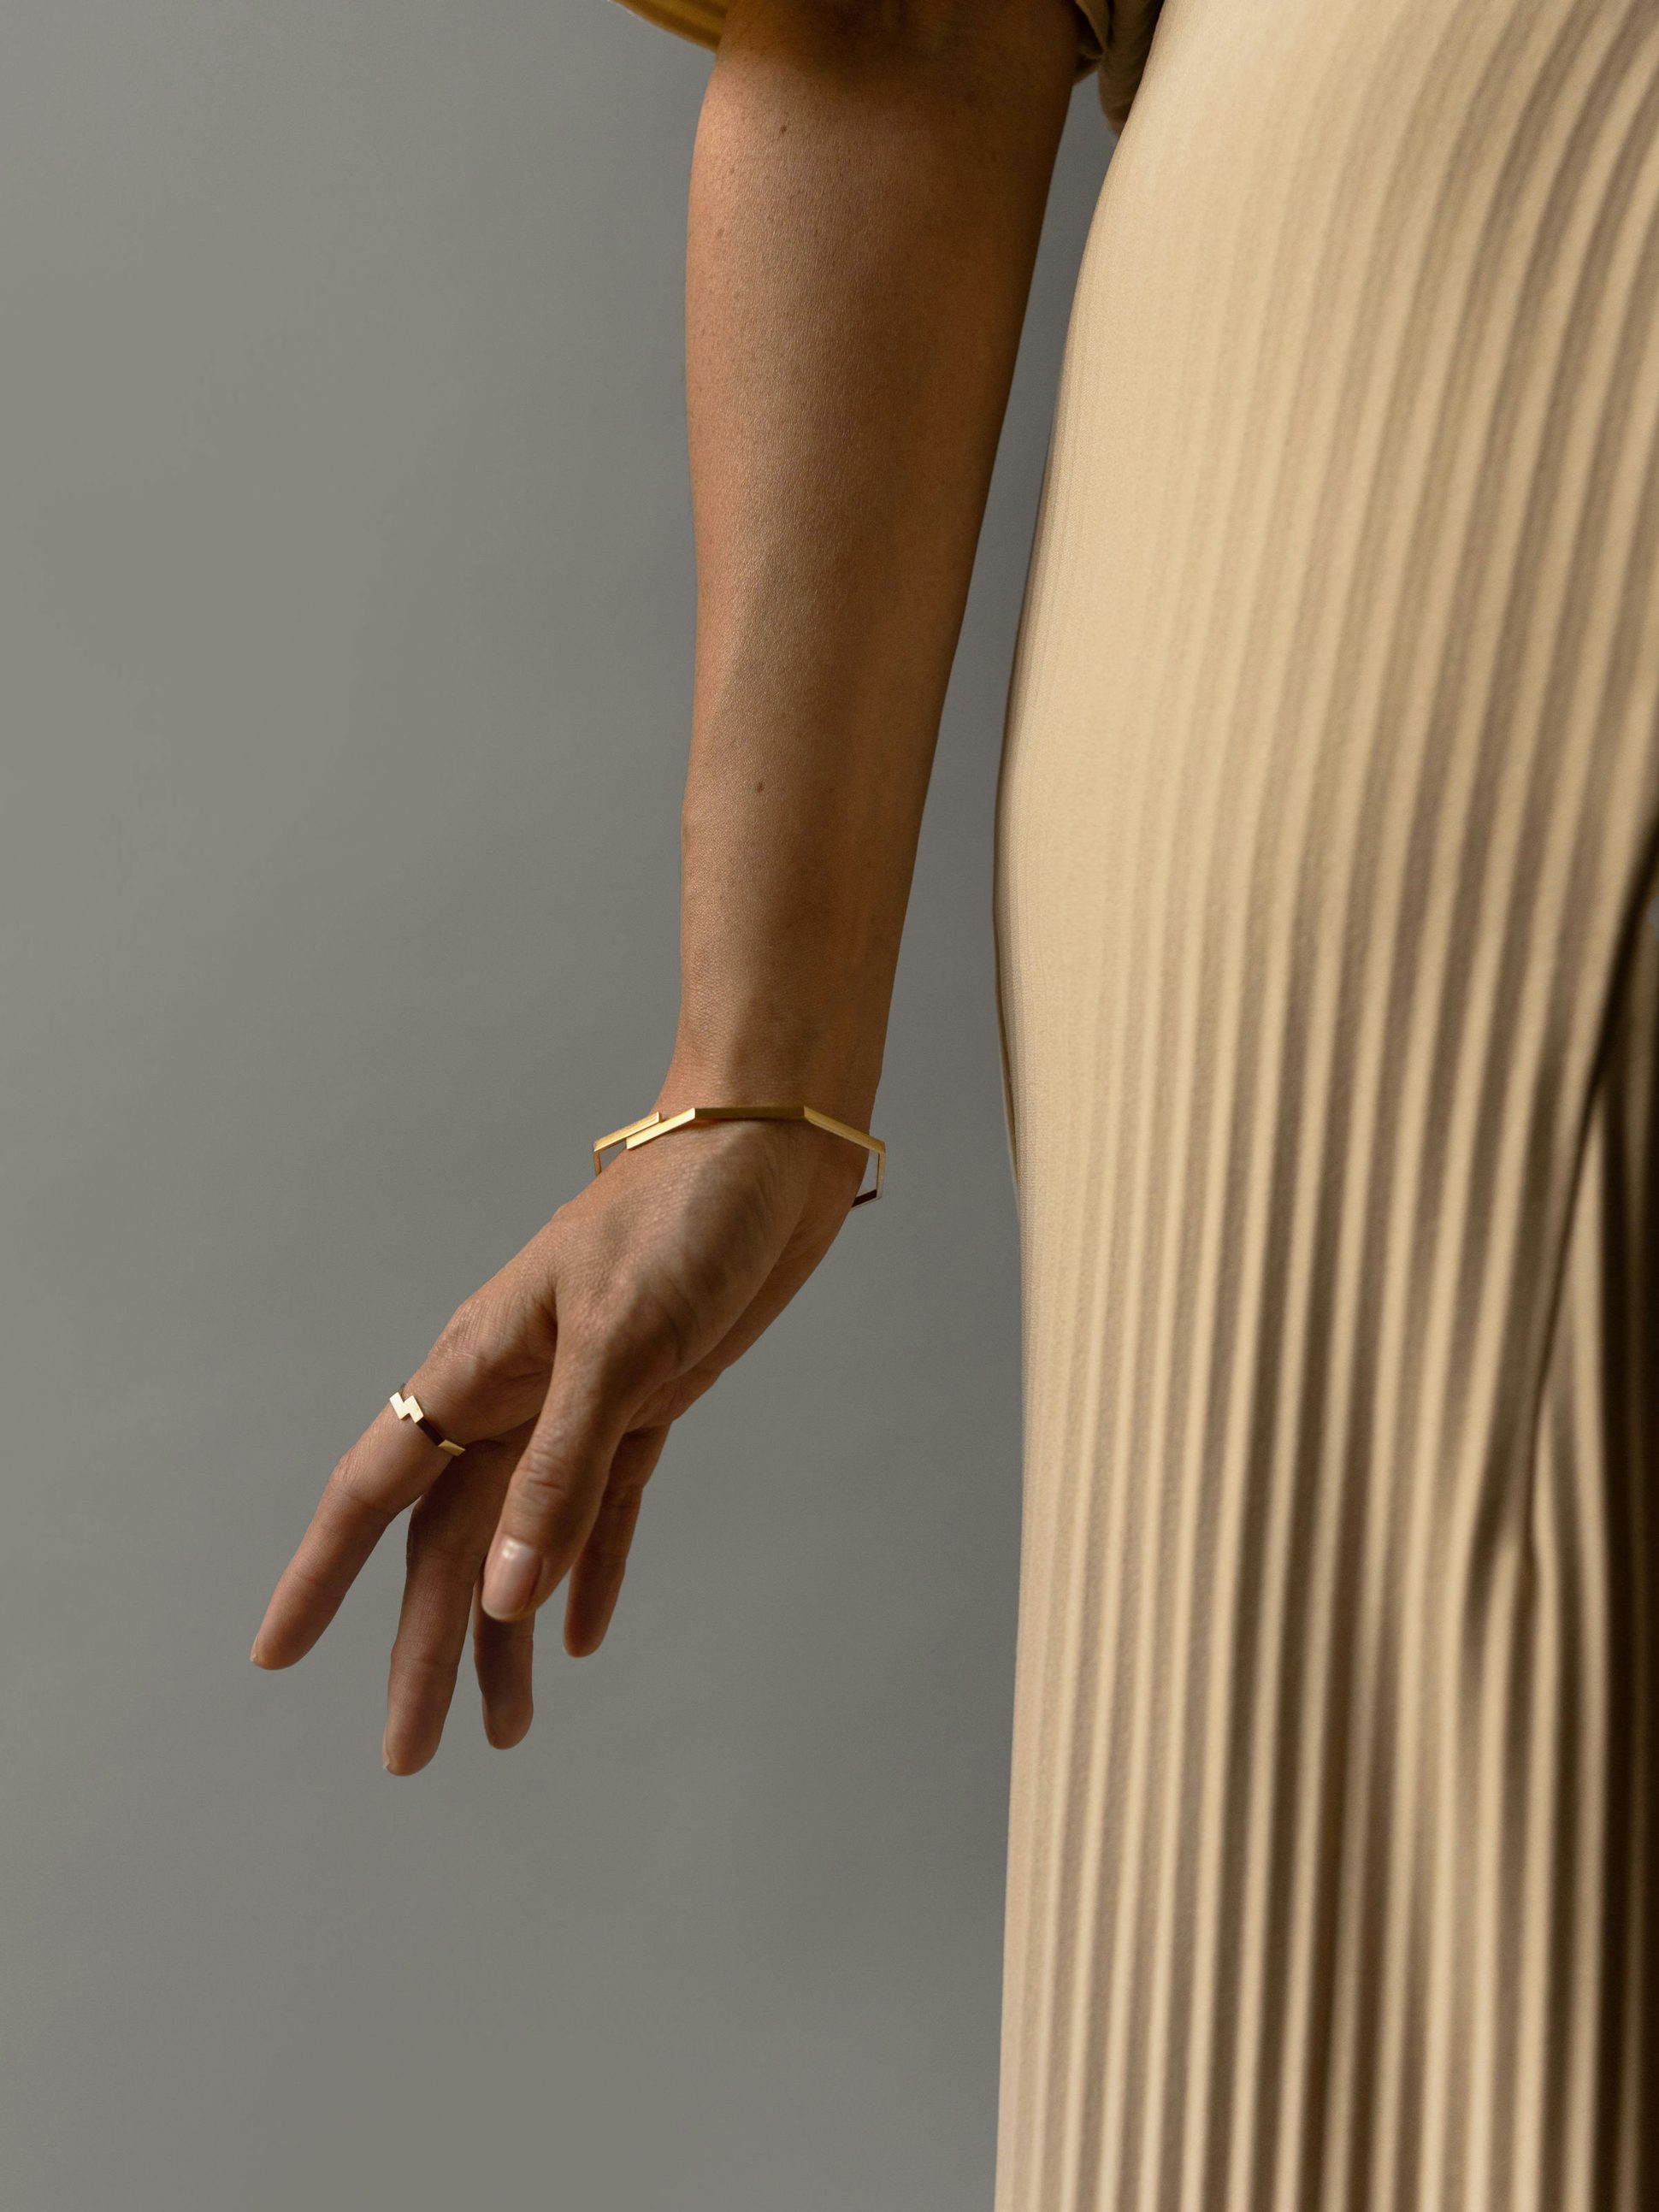 Octogone double bangle in 18k Fairmined ethical yellow gold